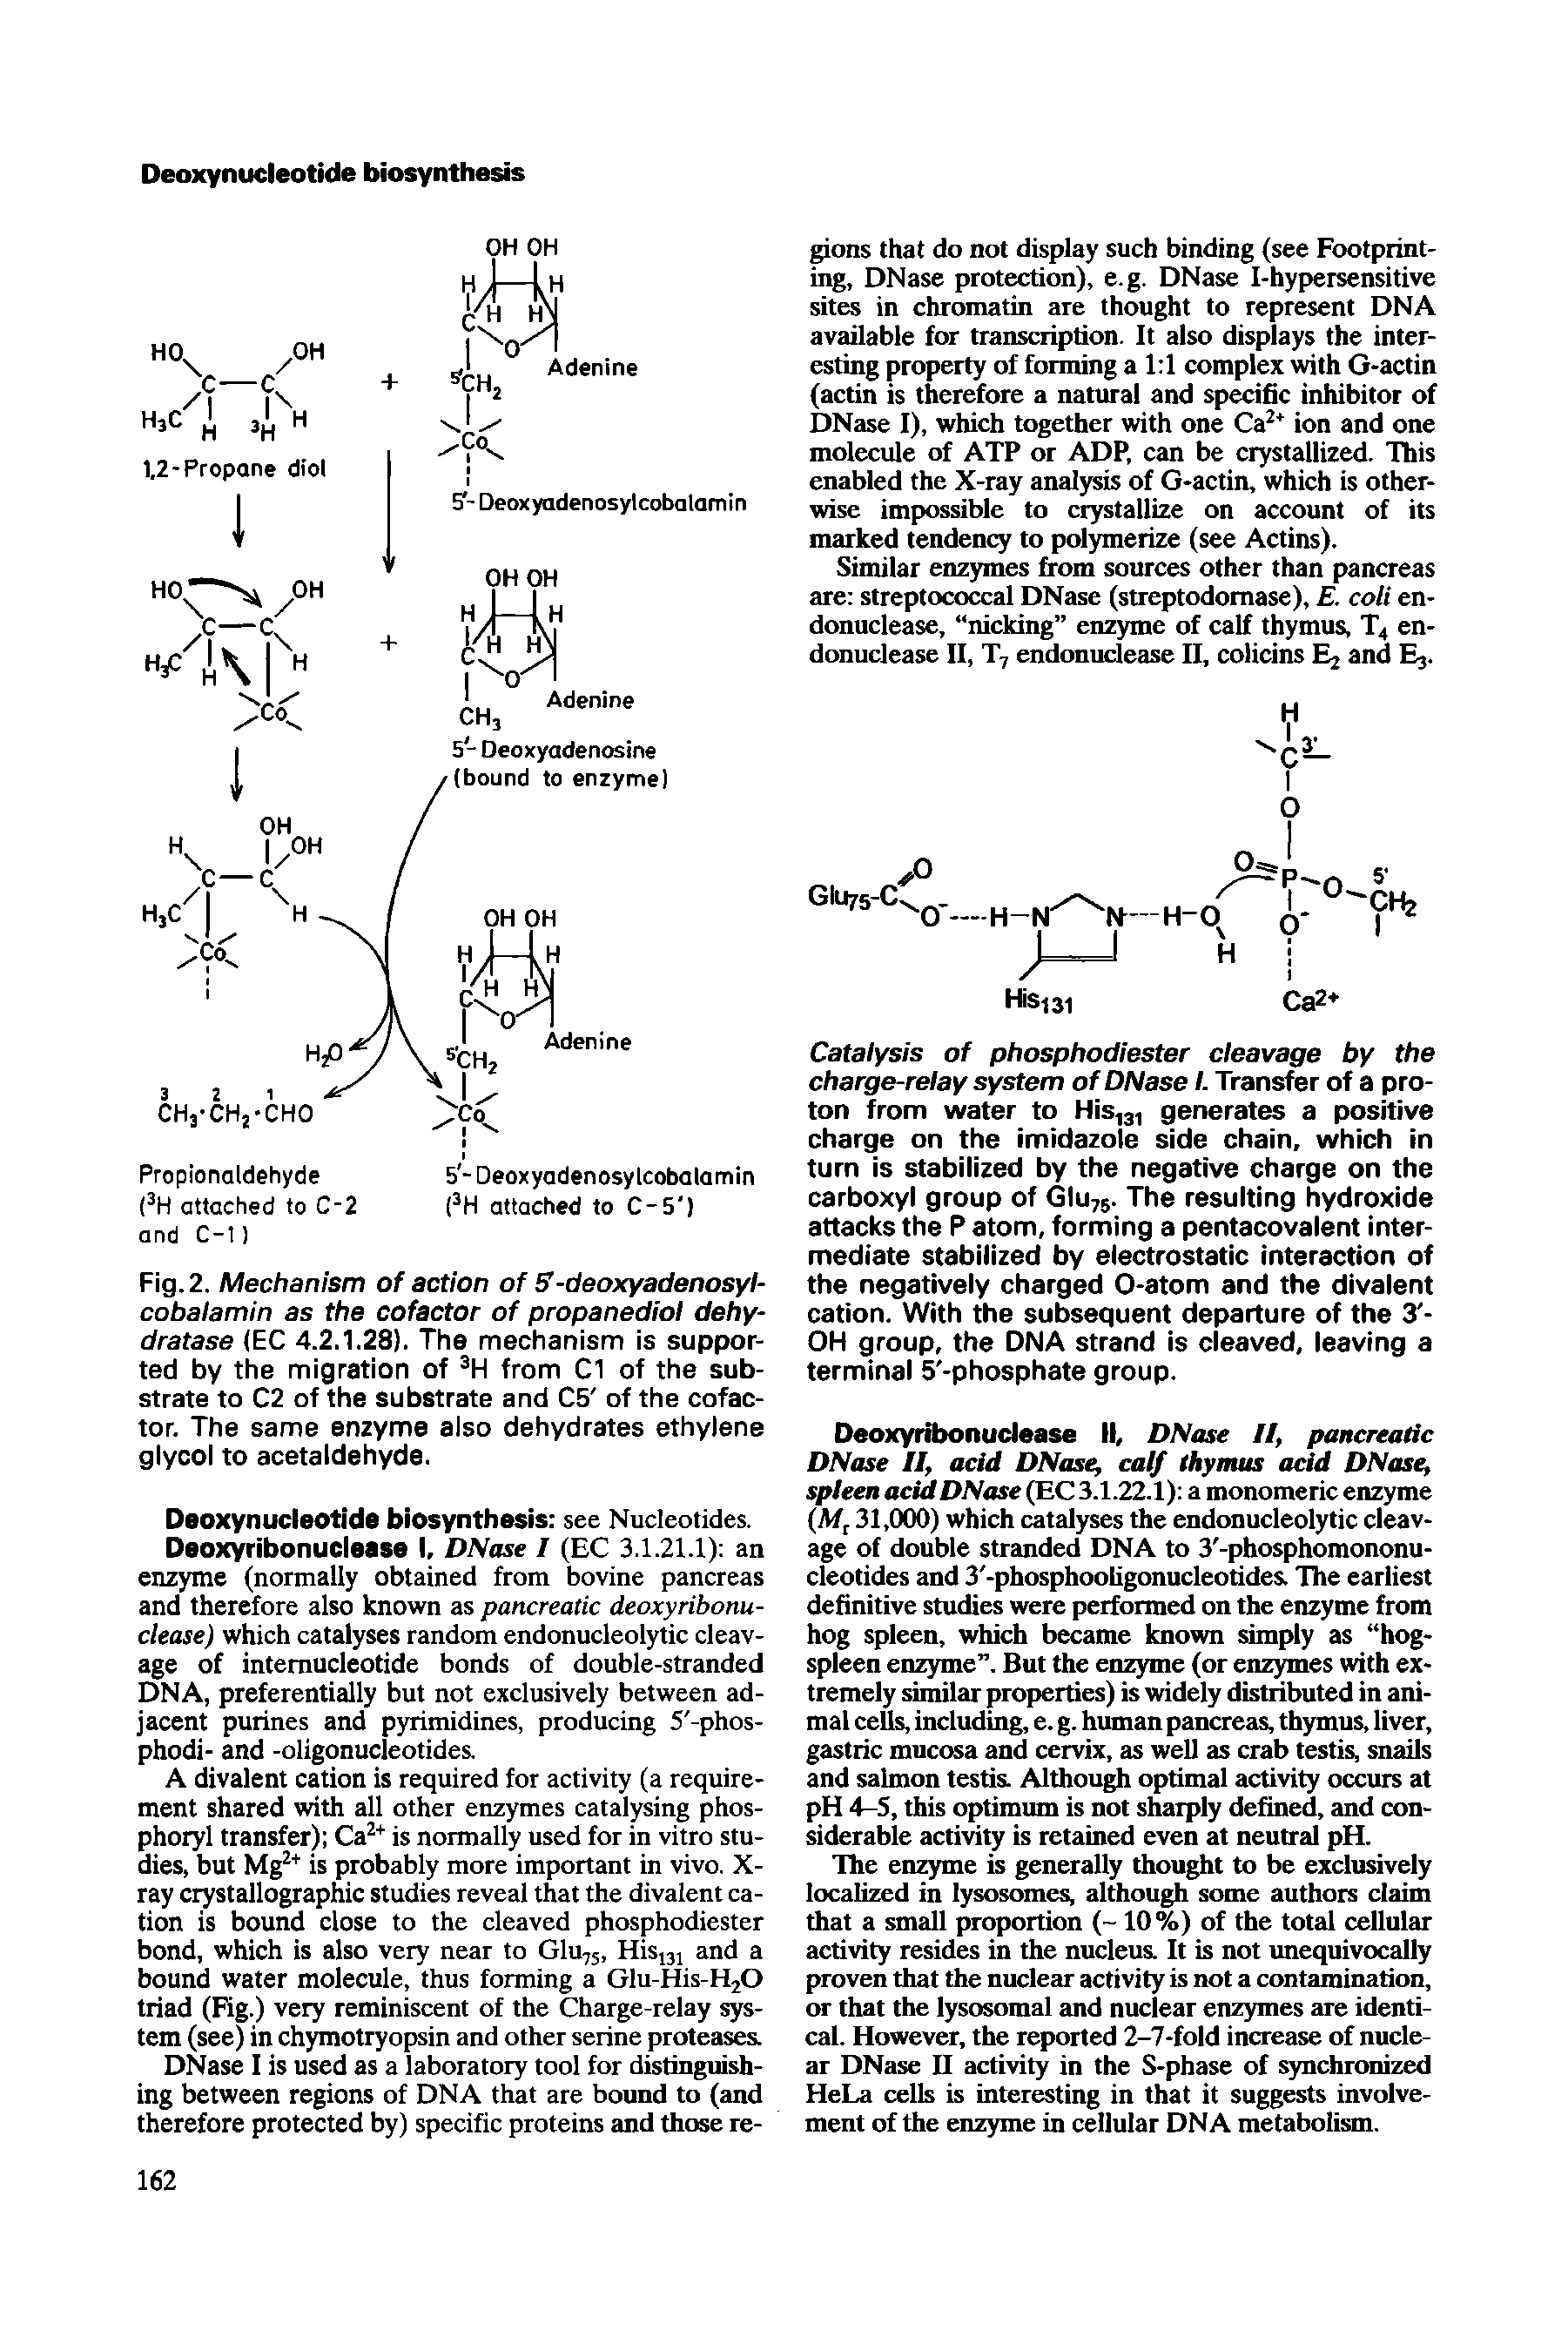 Fig. 2. Mechanism of action of 5-deoxyadenosyl-cobalamin as the cofactor of propanediol dehydratase (EC 4.2.1.28). The mechanism is supported by the migration of from Cl of the substrate to C2 of the substrate and C5 of the cofactor. The same enzyme aiso dehydrates ethylene giycoi to acetaidehyde.